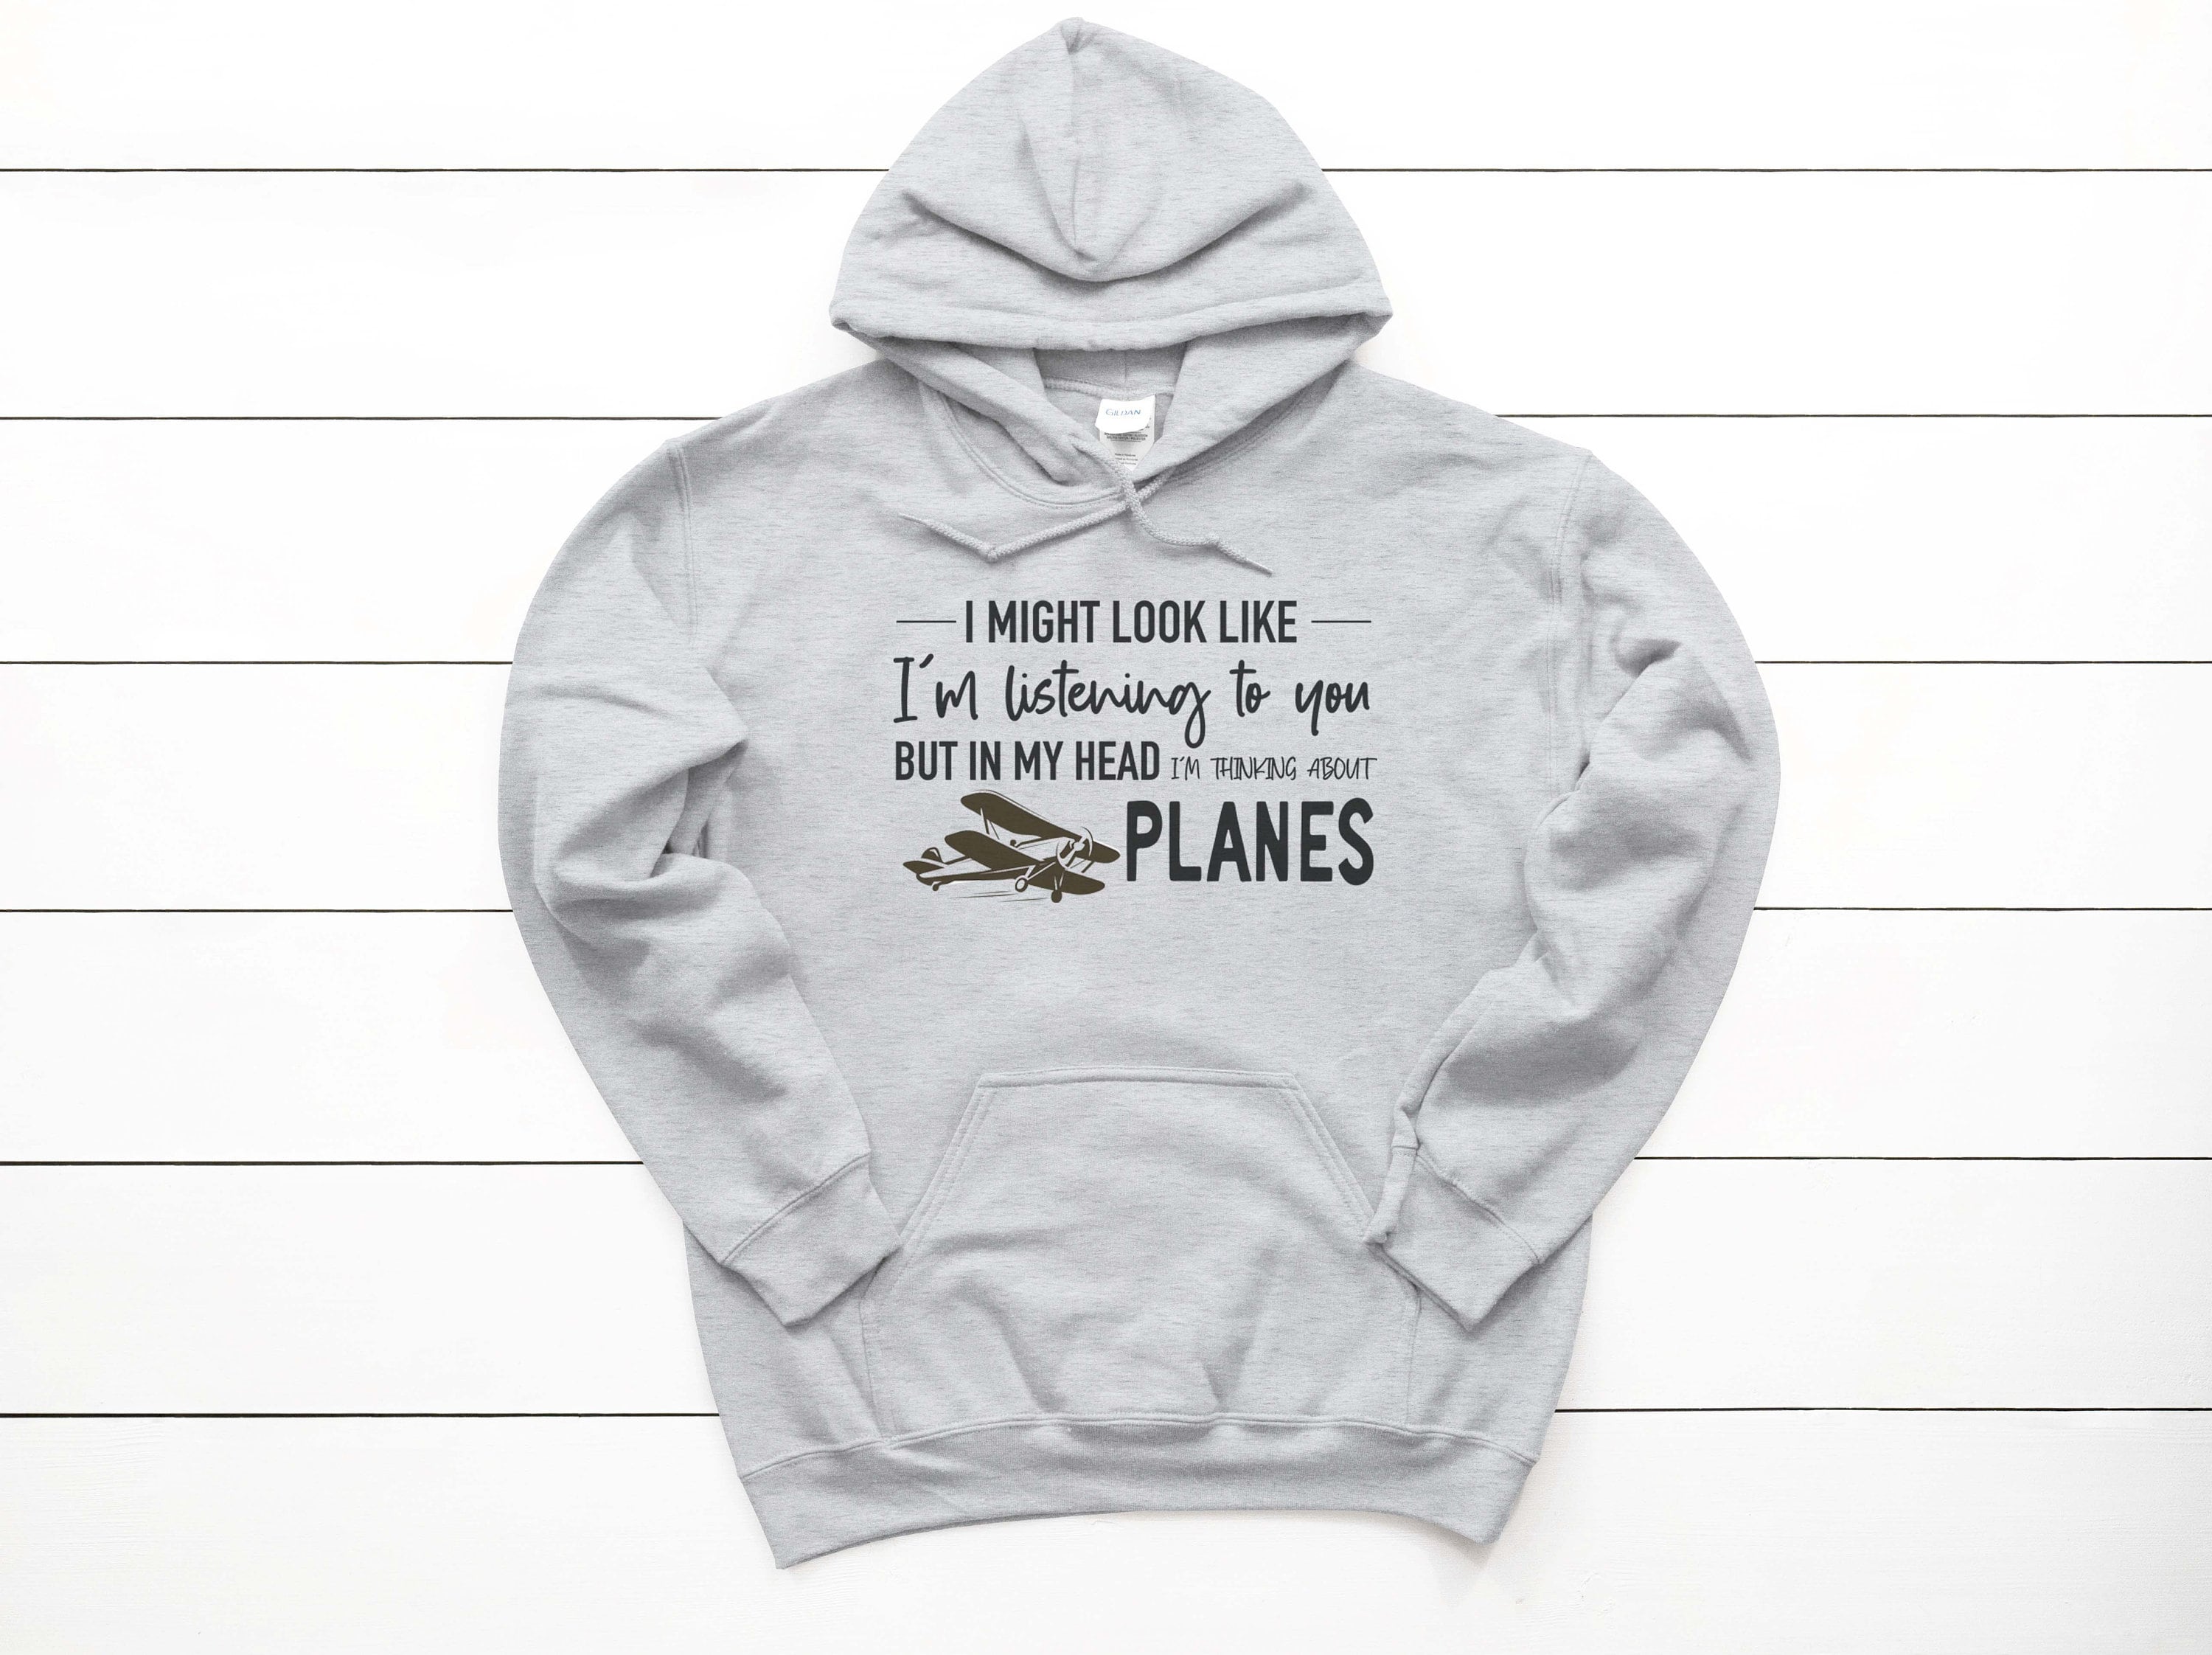 Pilot Hoodie, Thinking About Planes, Plane Gift, Kids & Adult Sizes, Pilot  Gift, Sublimated Design, Unisex Fit, Airplane Hoodie, Planes